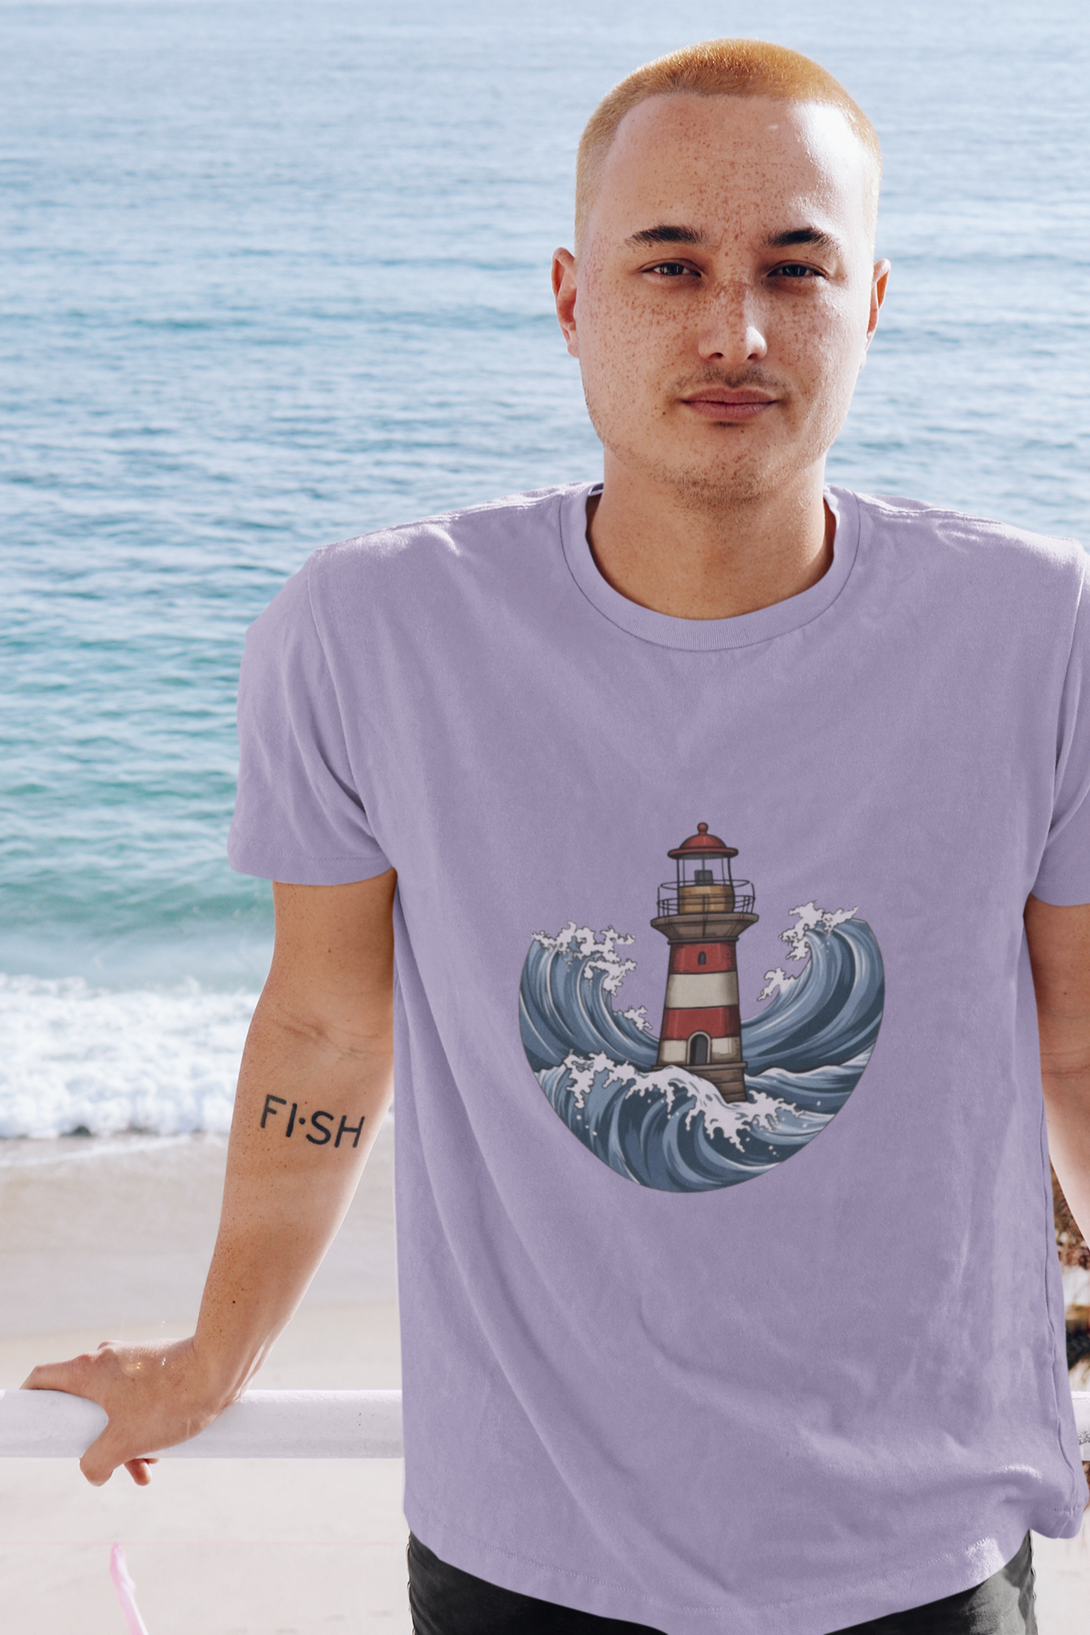 Lighthouse And Waves Printed T-Shirt For Men - WowWaves - 2